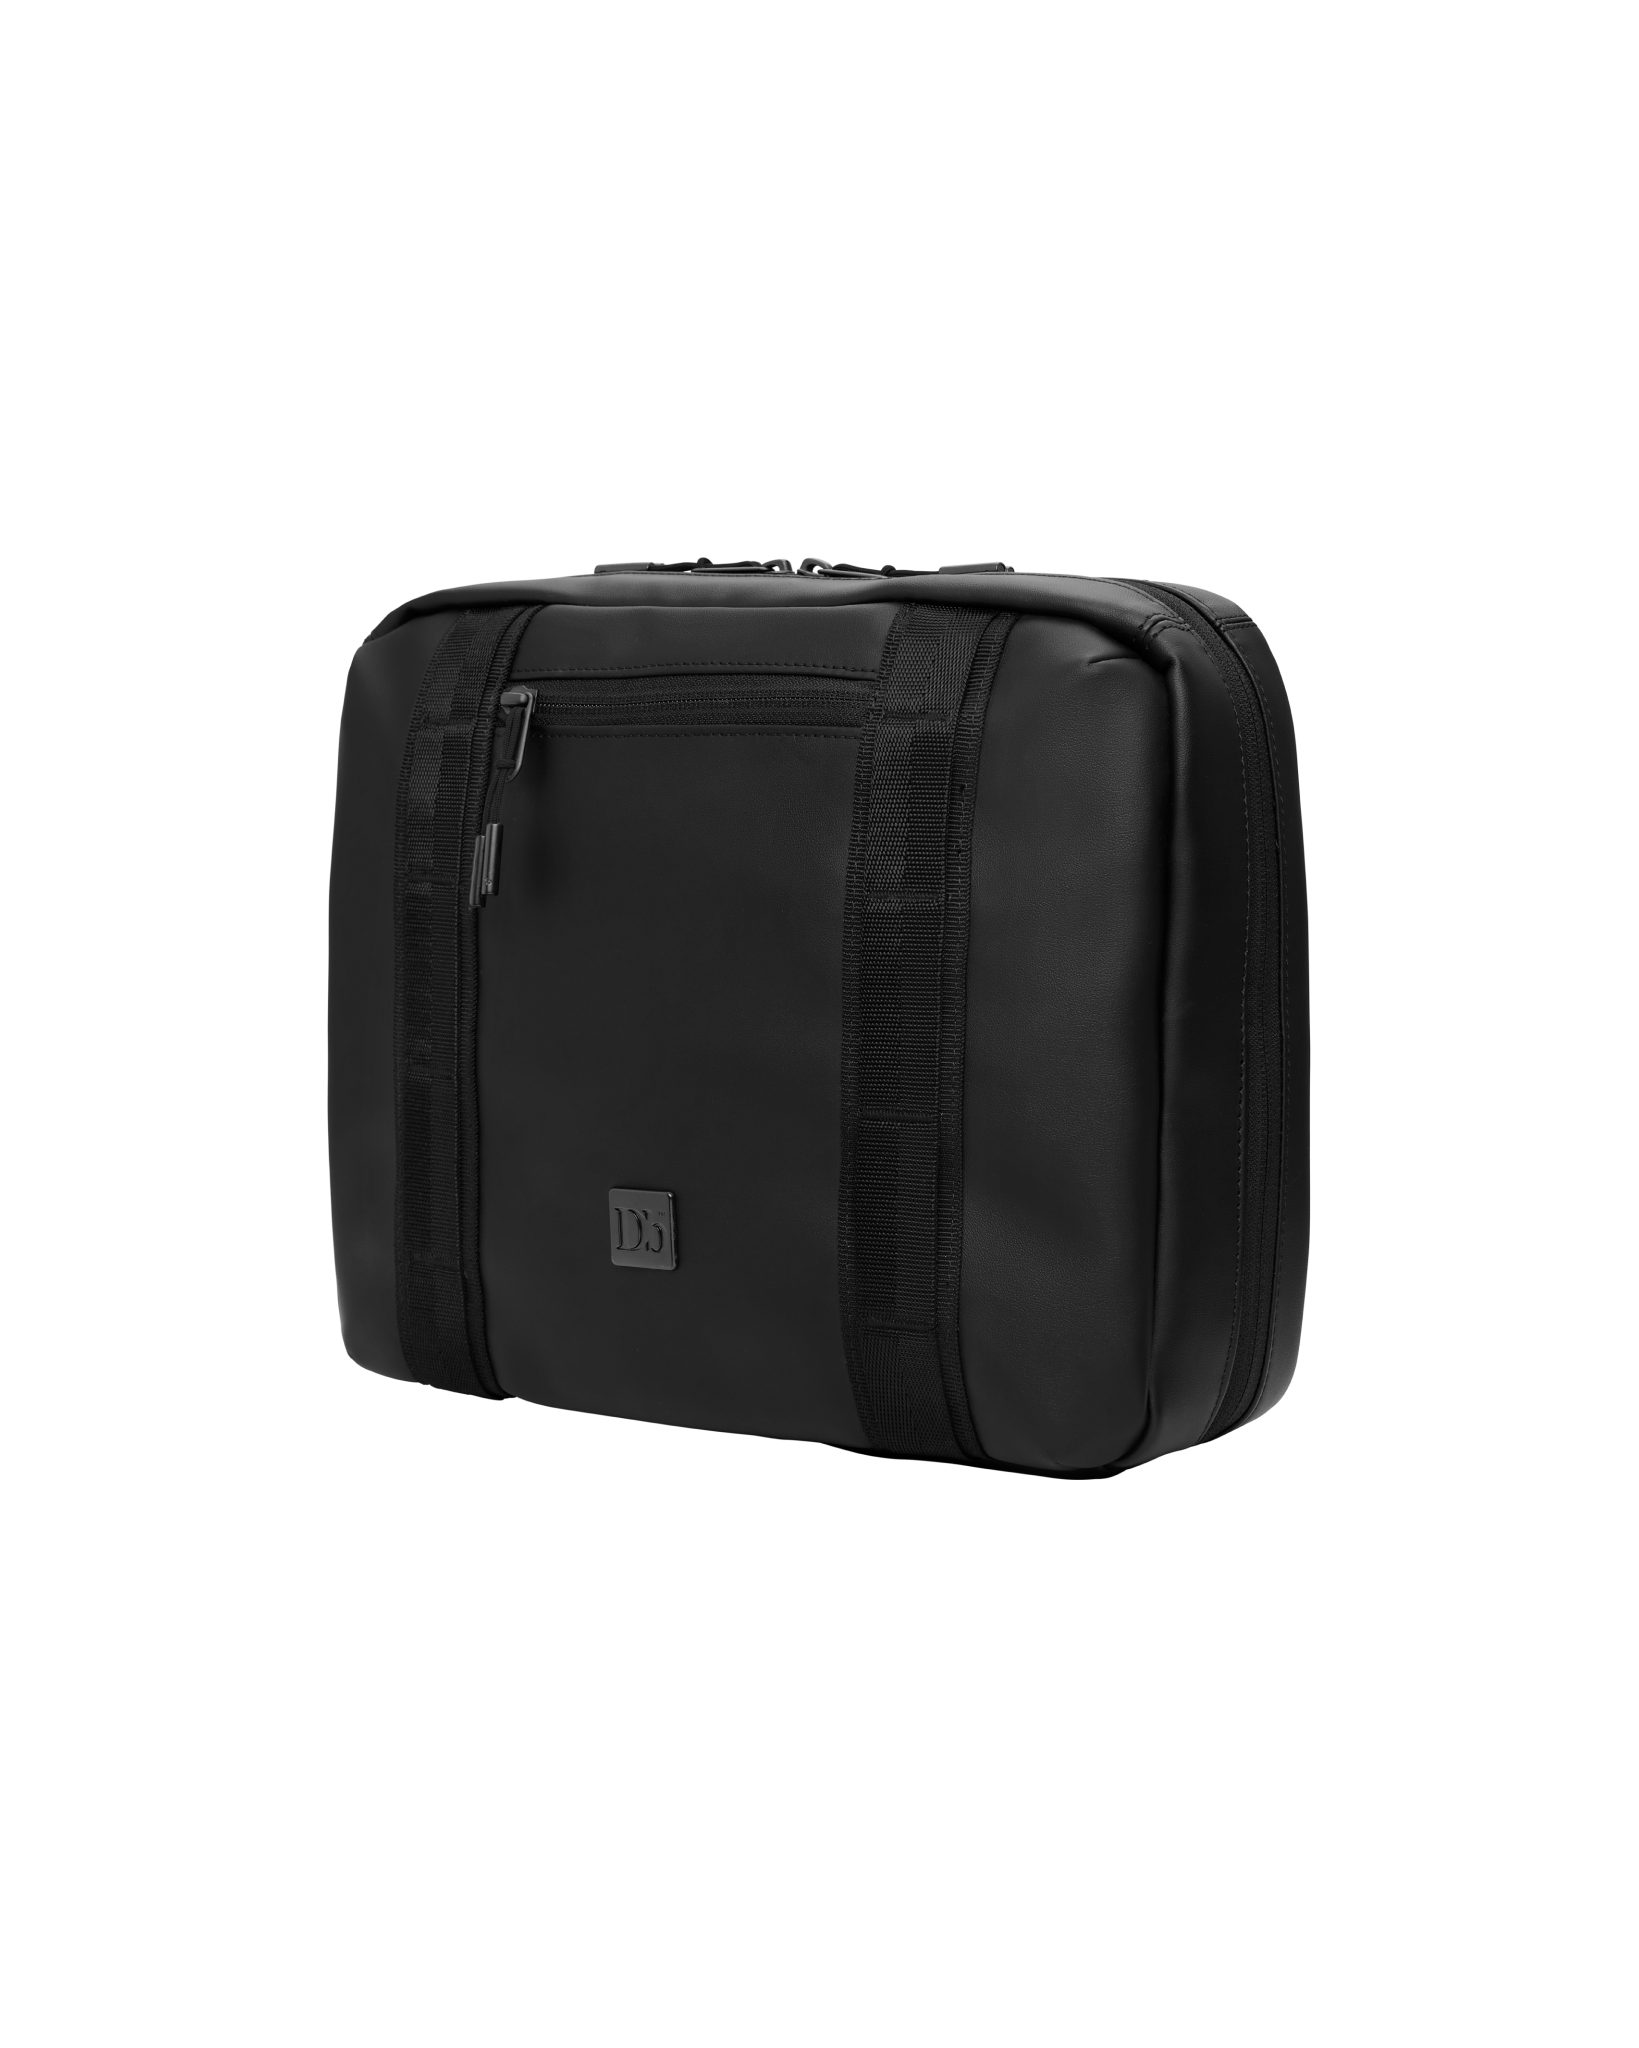 Essential Travel Organizer Black Out - Black Out